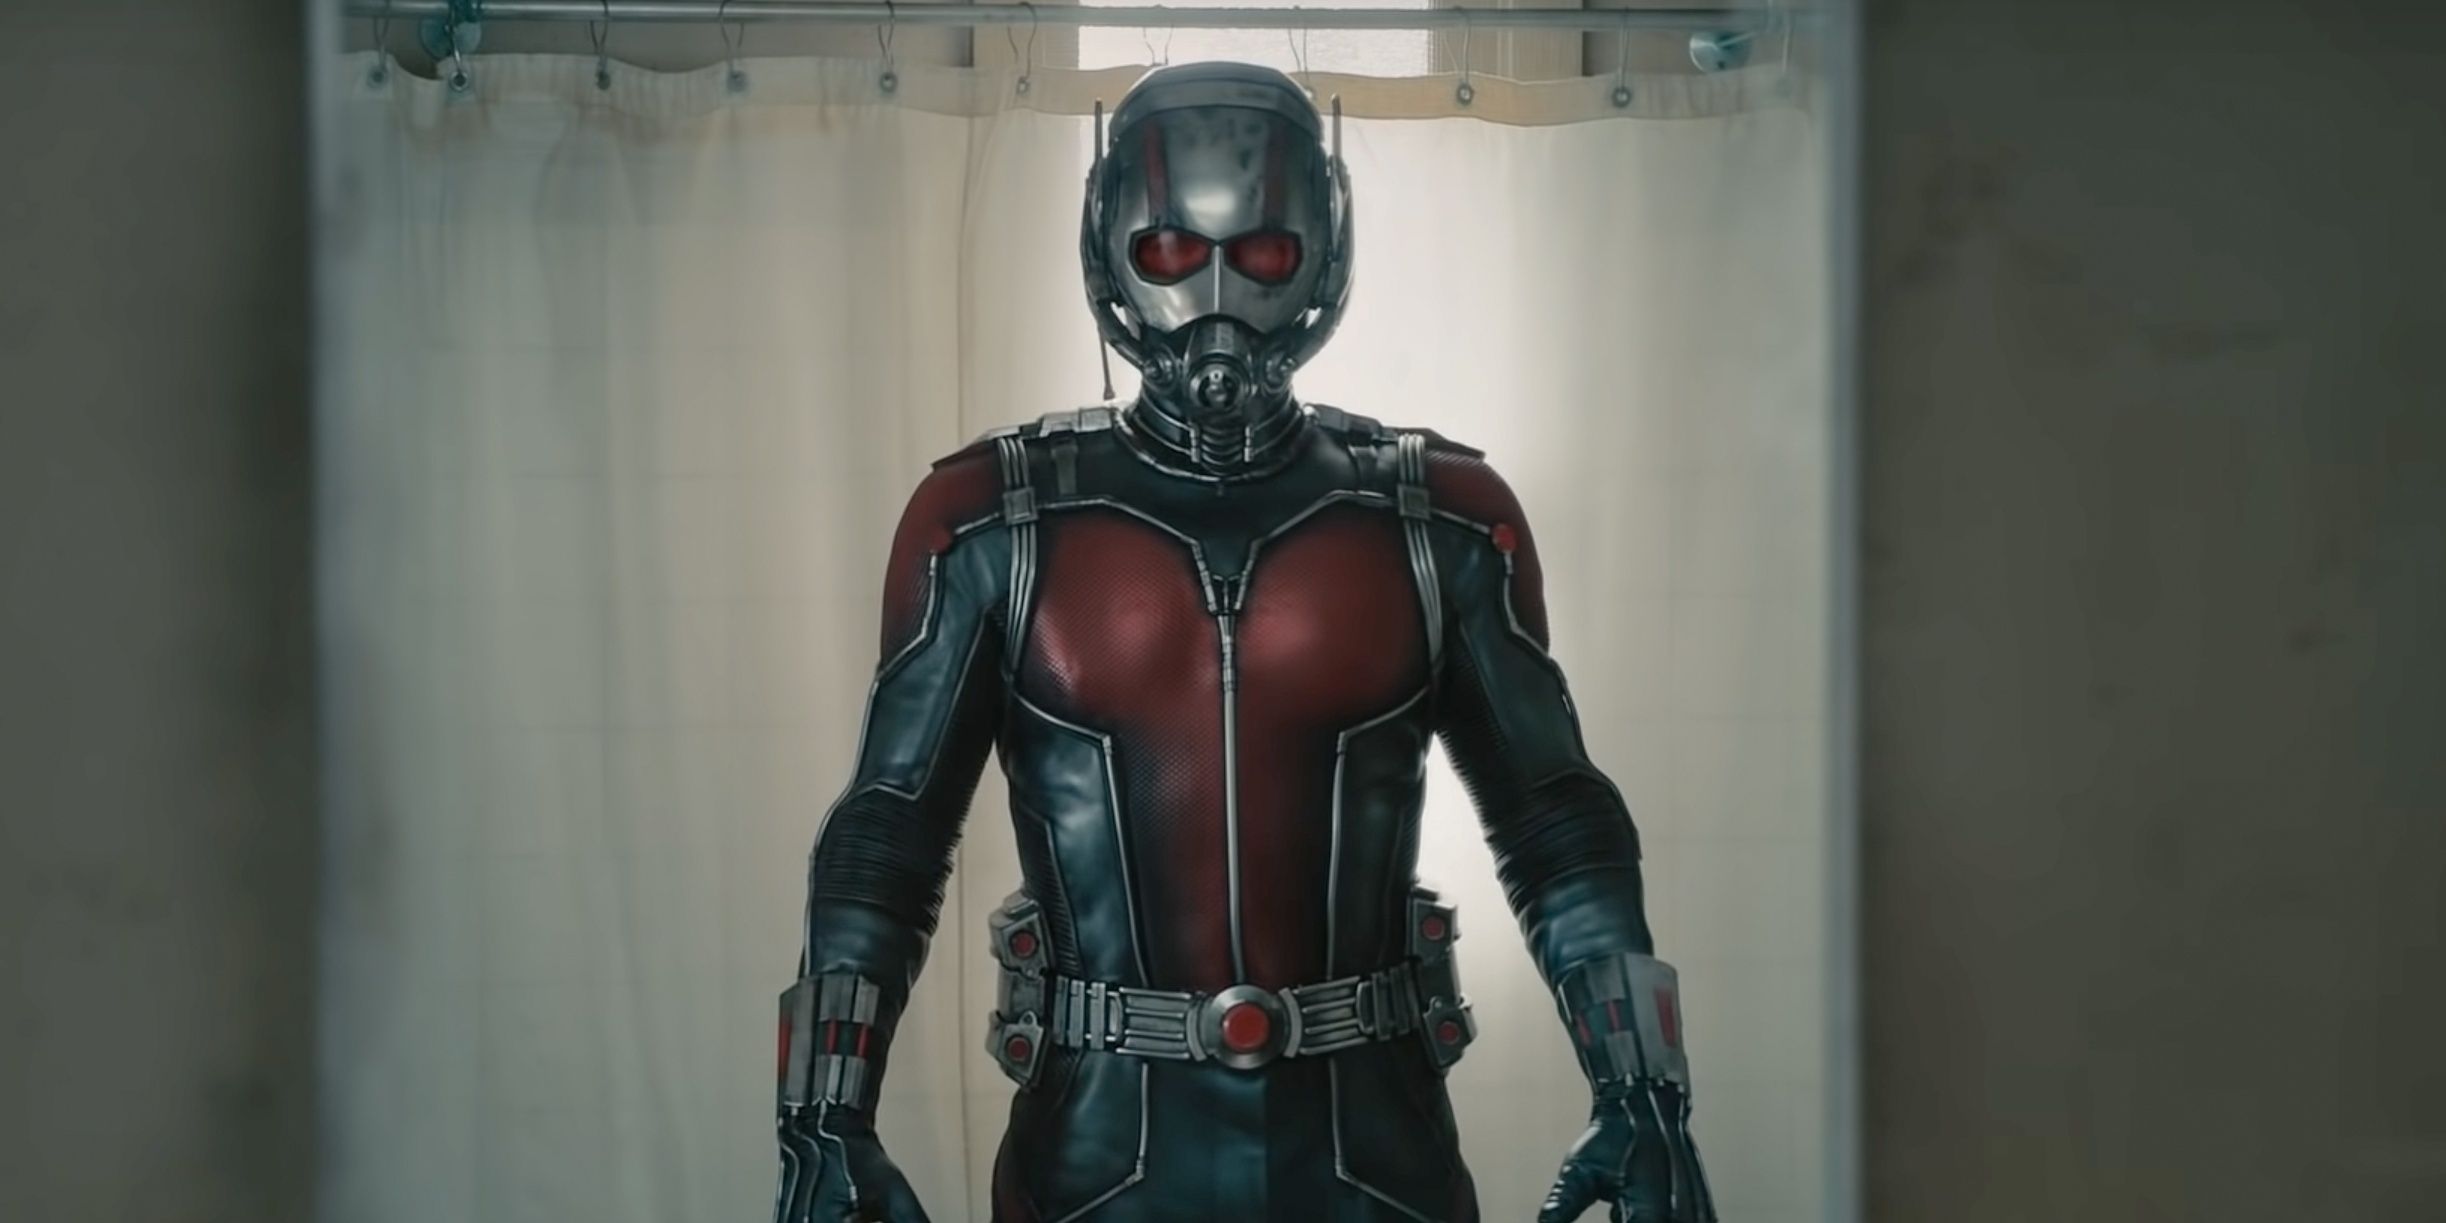 Ant-Man, Scott wears suit and looks in mirror